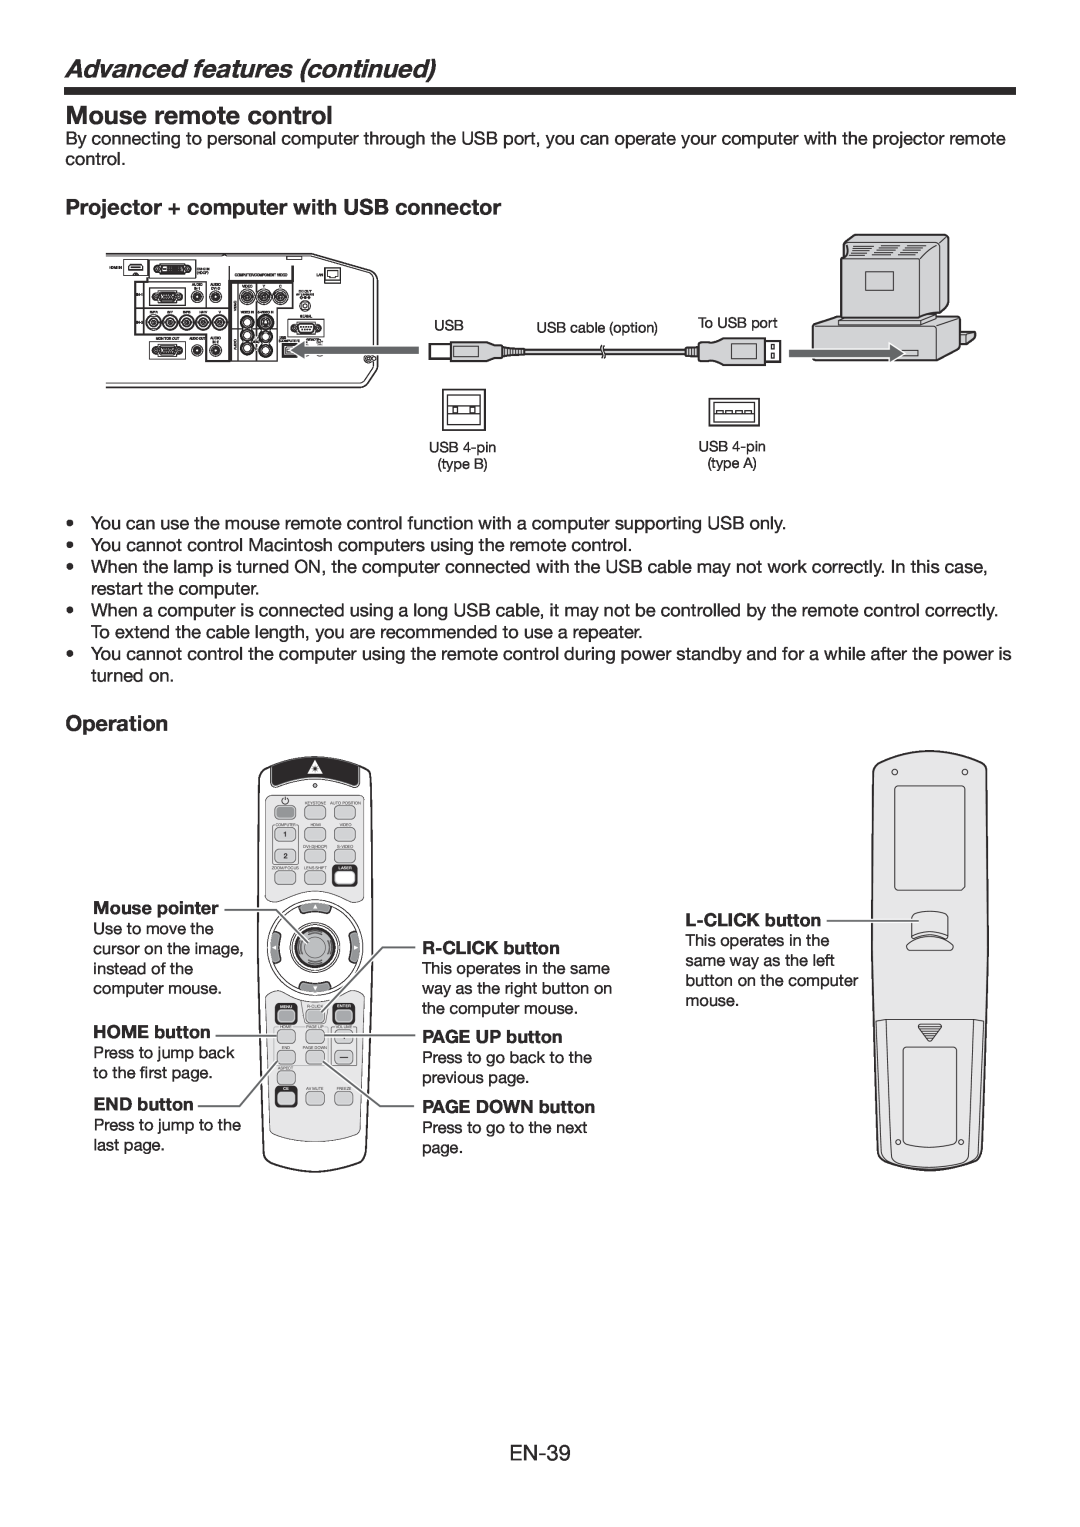 Mitsumi electronic WD3300U Mouse remote control, Projector + computer with USB connector, Operation, Mouse pointer 